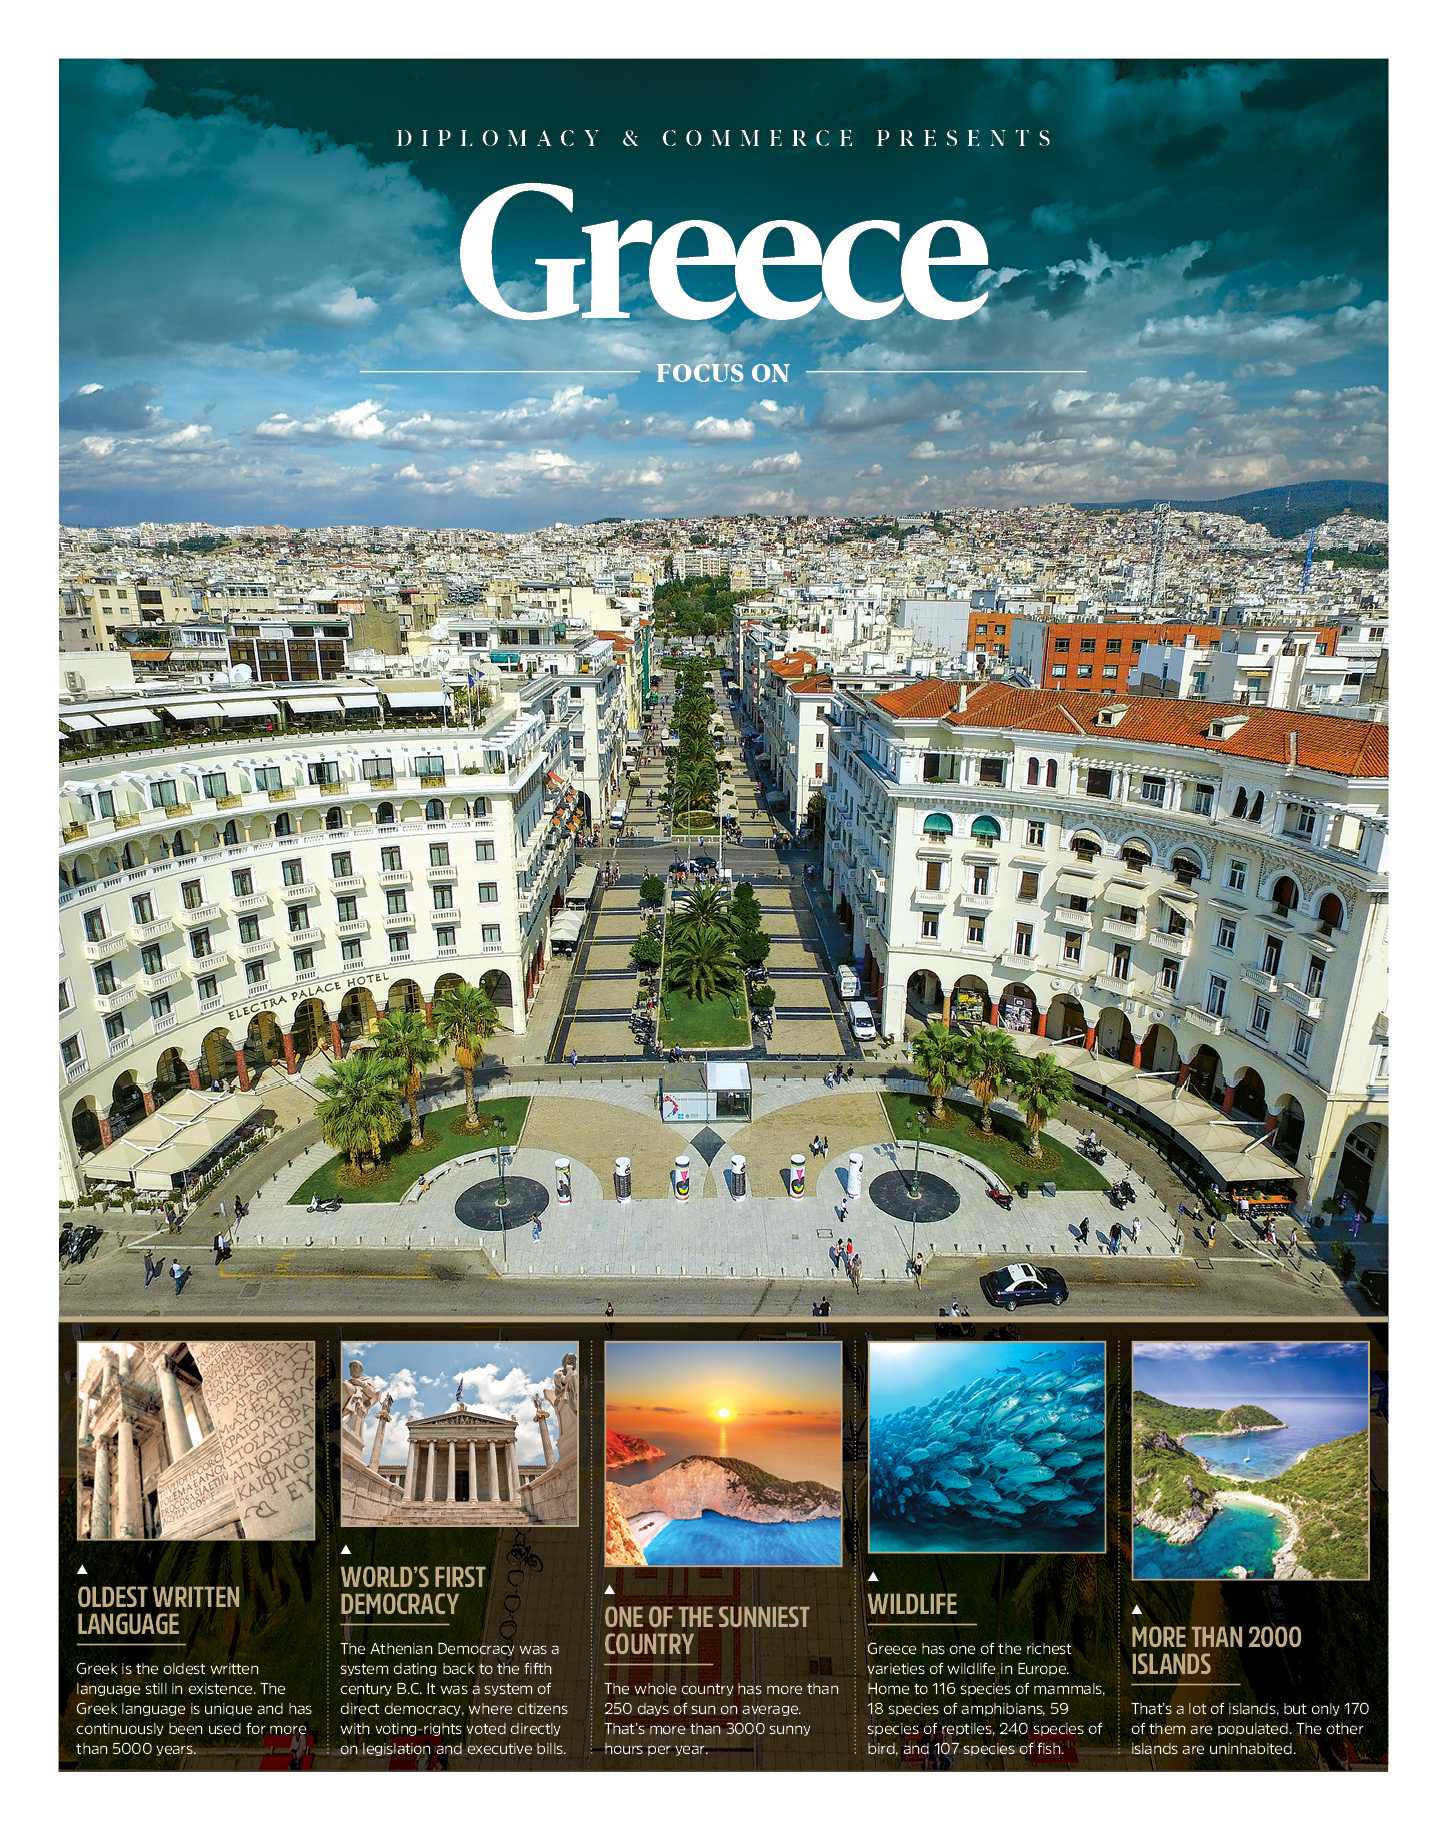 DandC - Diplomacy and Commerce - Focus-On - Greece 2020